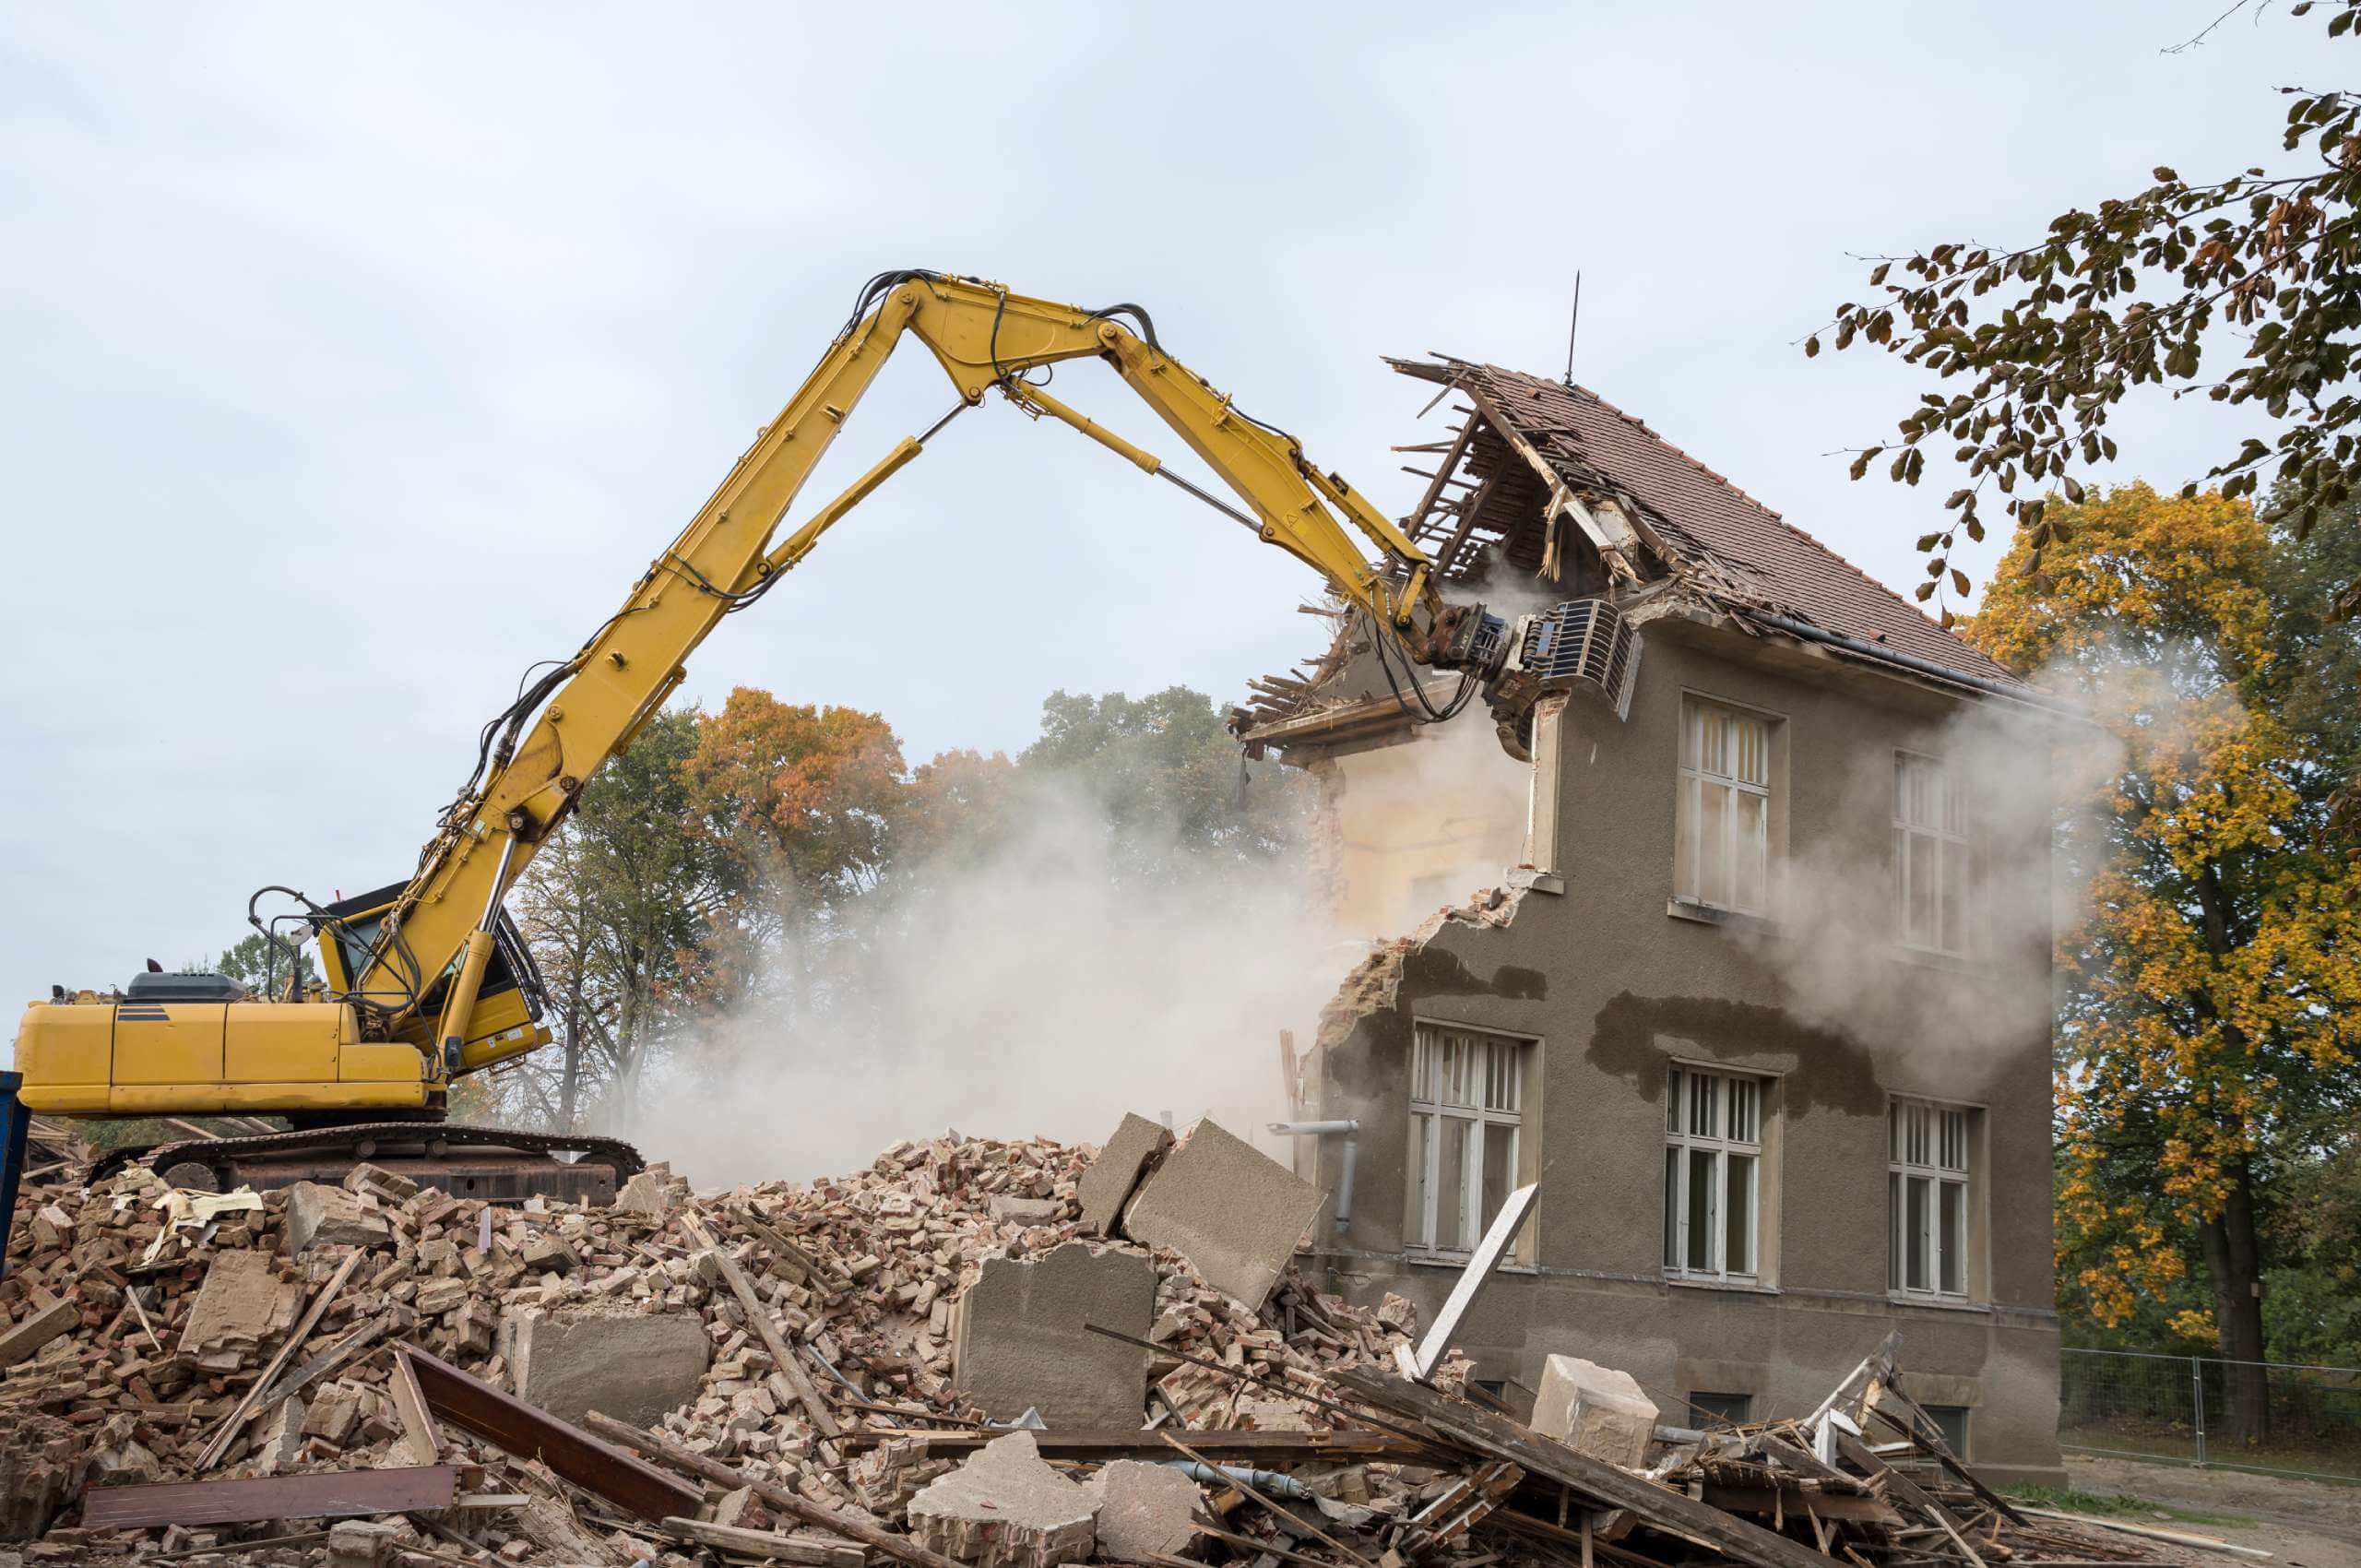 home being knocked down by excavator